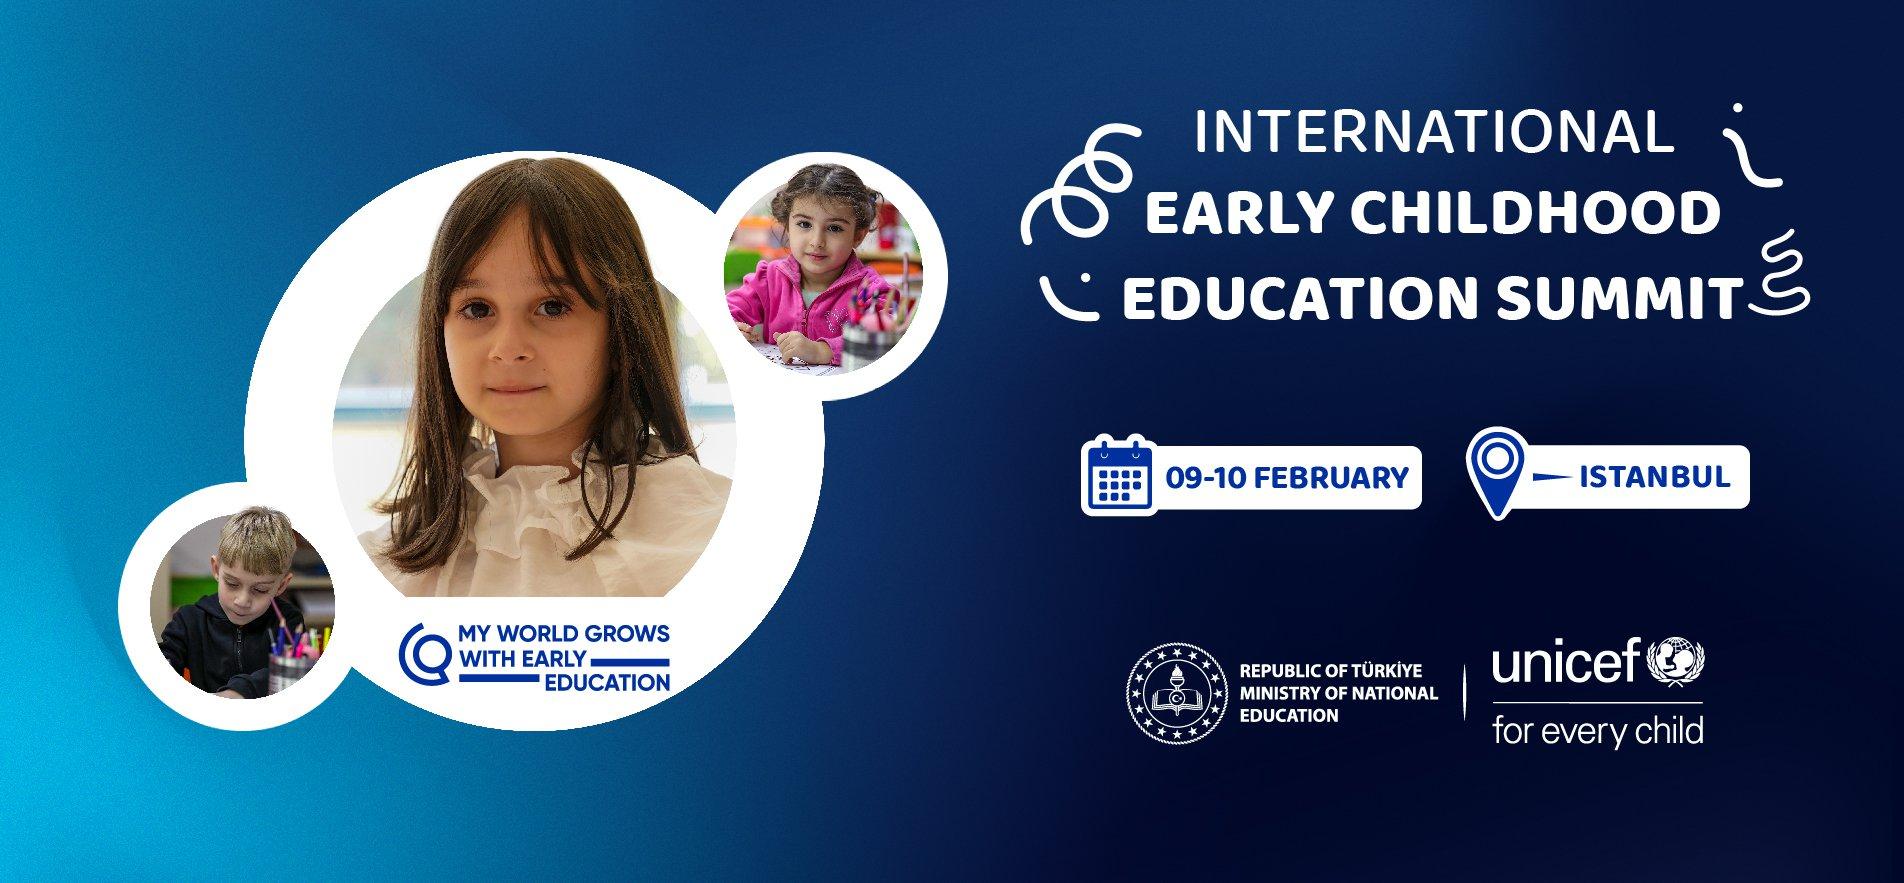 MEB WILL DISCUSS EARLY CHILDHOOD EDUCATION IN THE INTERNATIONAL ARENA